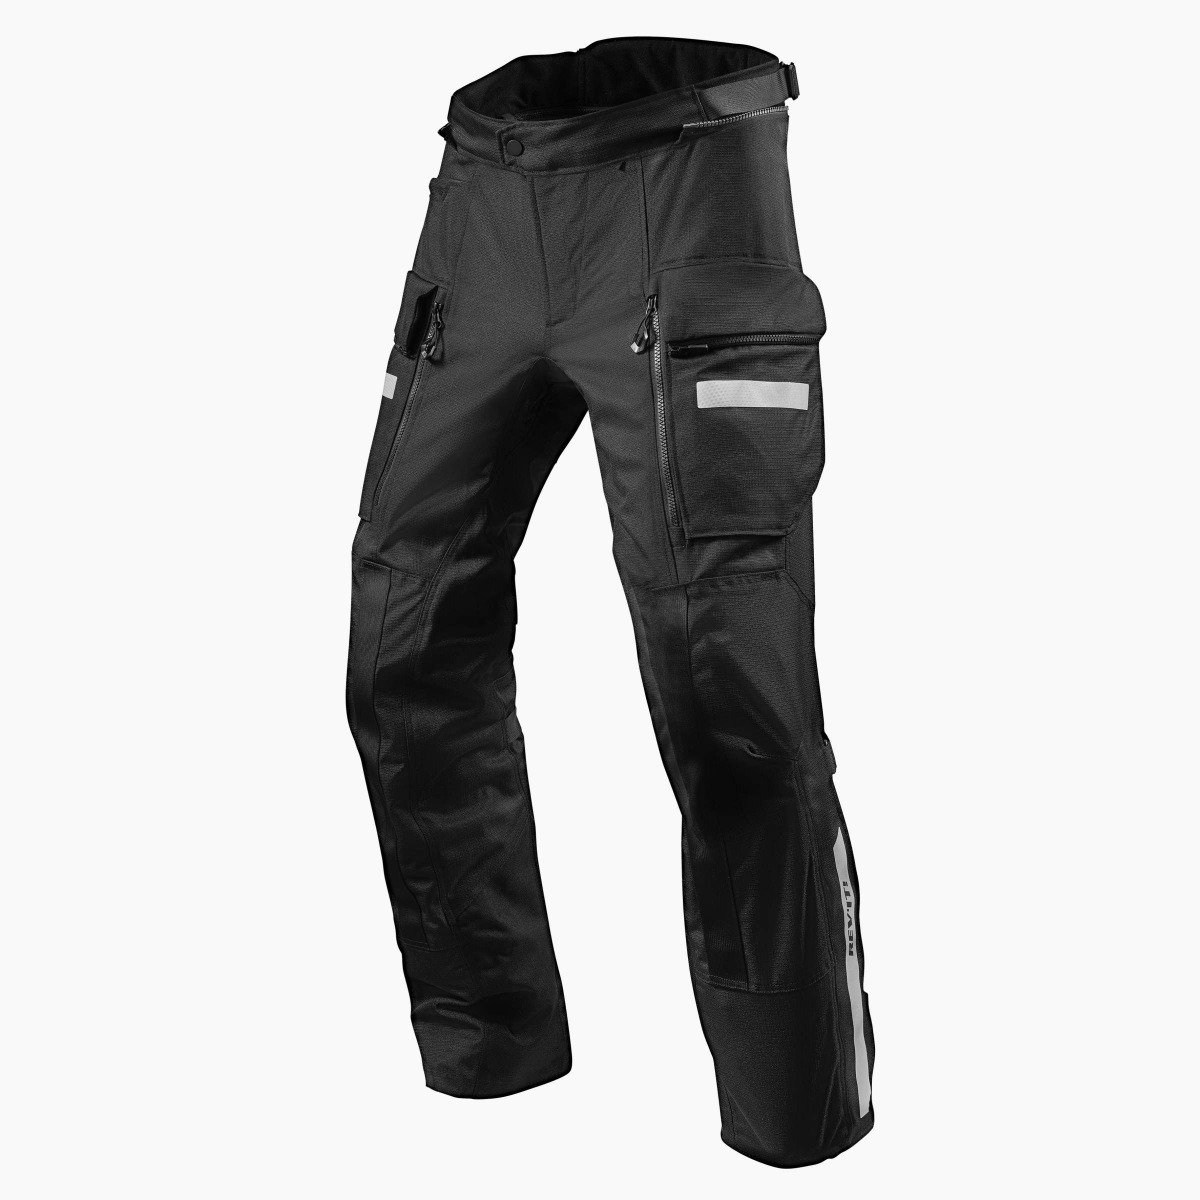 Image of REV'IT! Sand 4 H2O Short Black Motorcycle Pants Size S ID 8700001316316